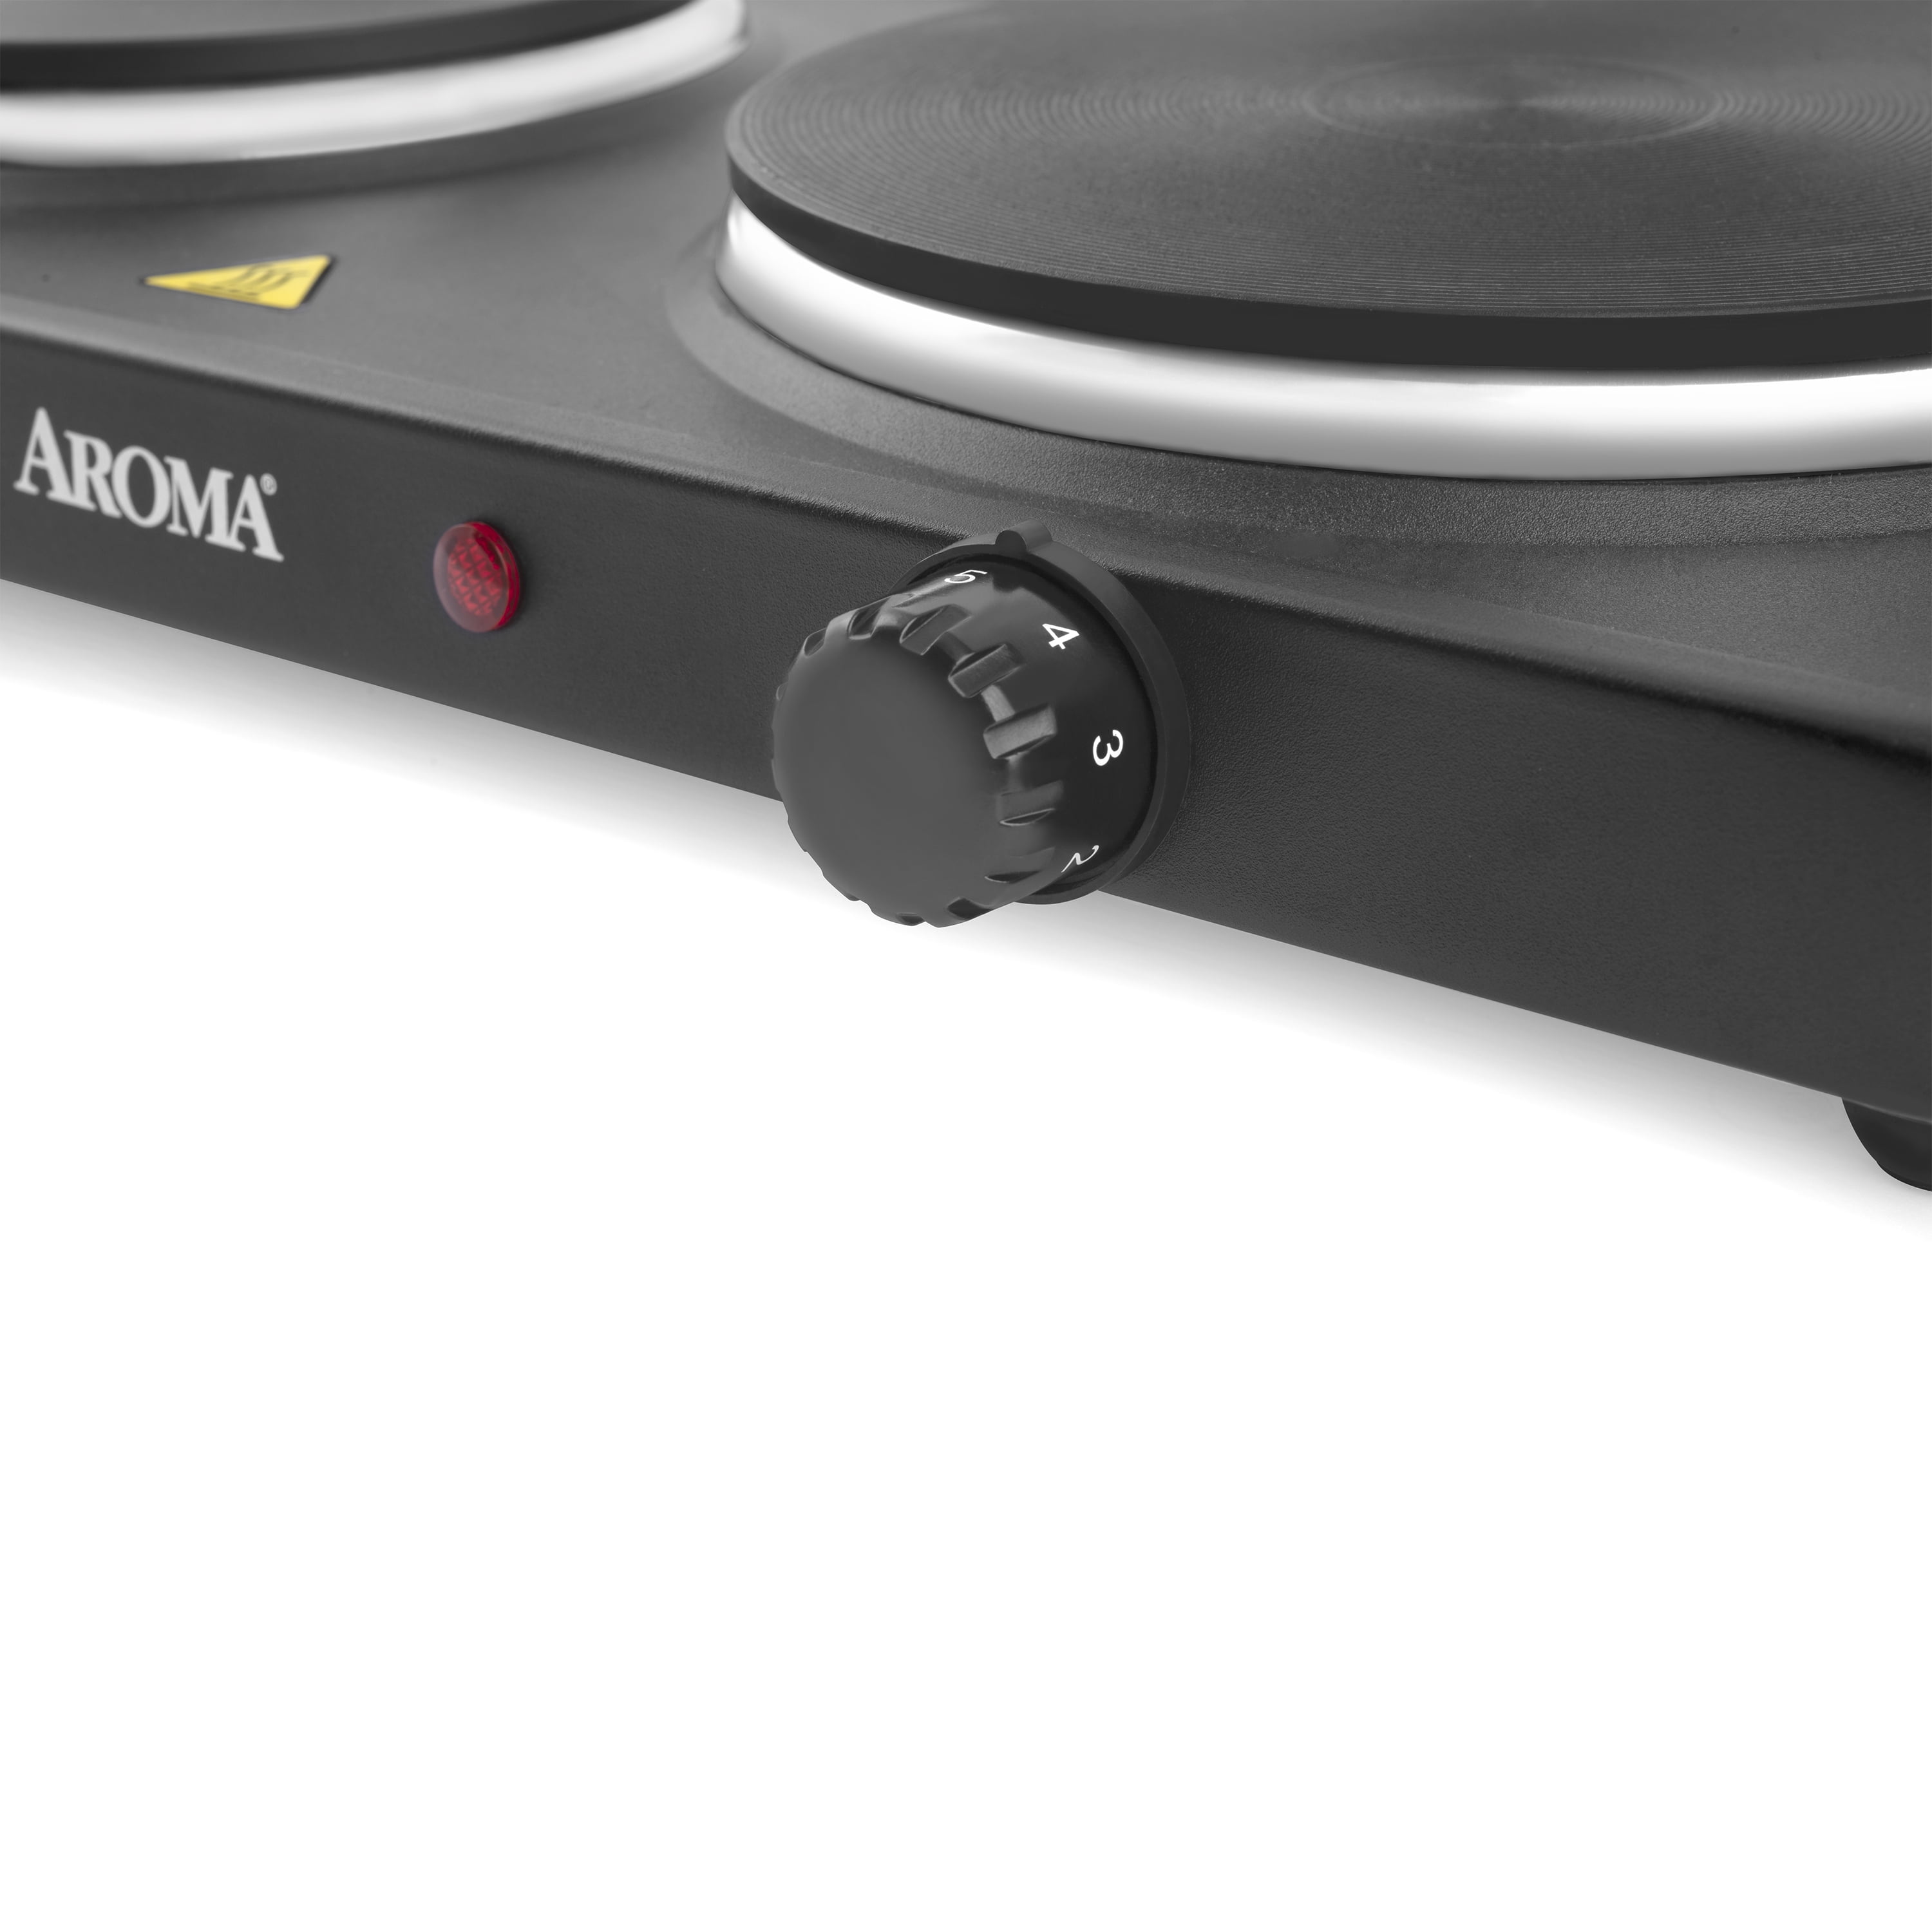 Aroma Ahp-312 Double Burner Hot Plate